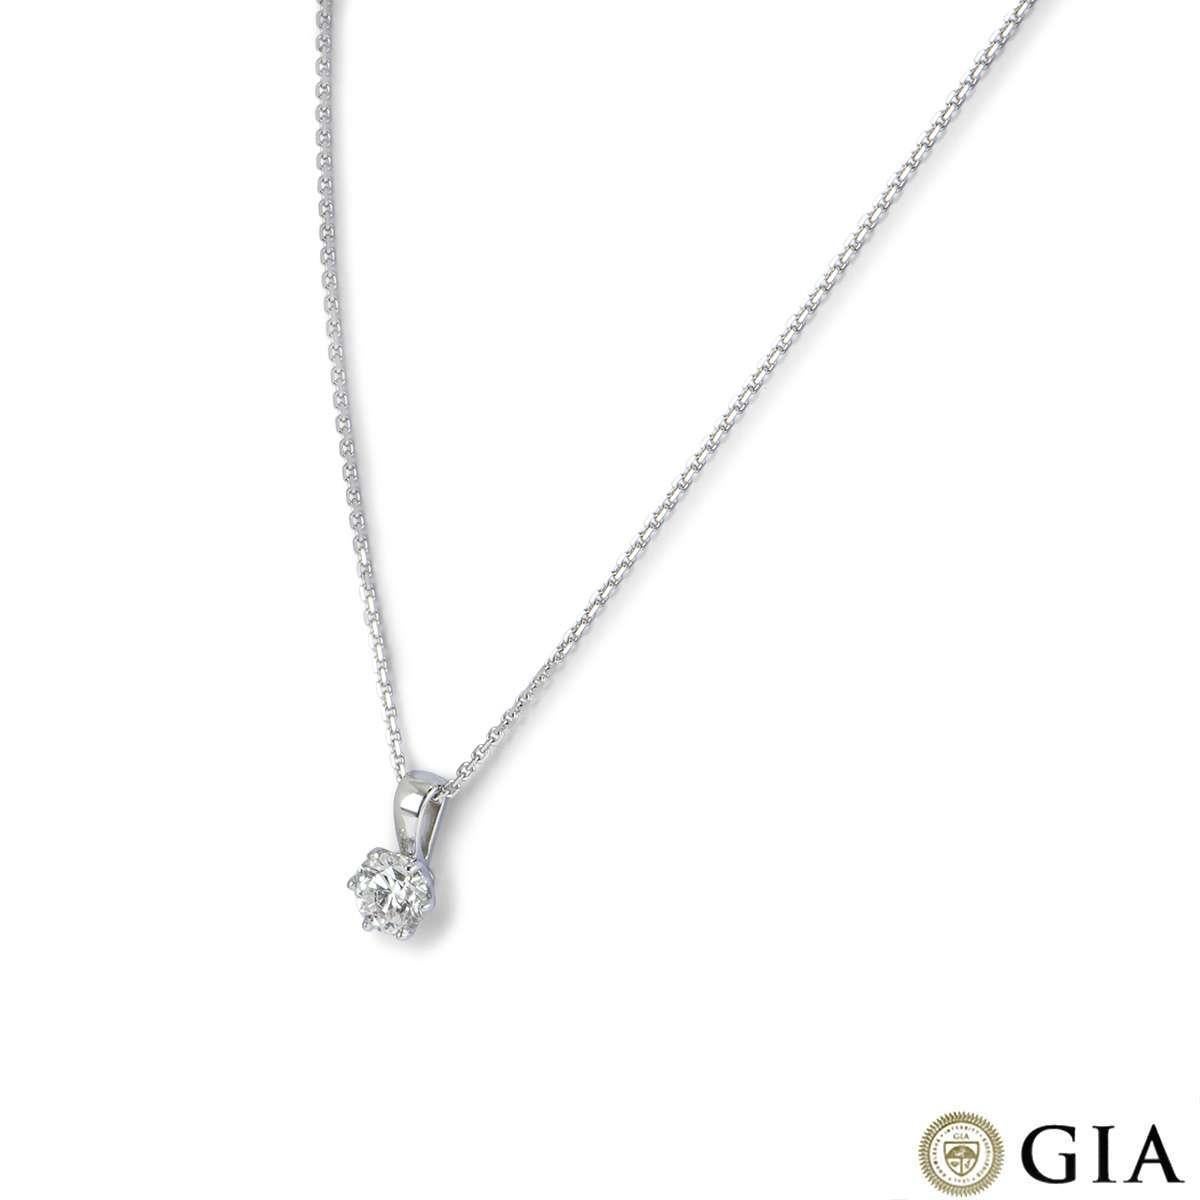 An 18k white gold diamond pendant. The pendant is set with a single round brilliant cut diamond weighing 0.90ct, G colour and VS1 clarity. The pendant comes on an 18 inch trace chain, complete with a lobster clasp. The necklace has a gross weight of